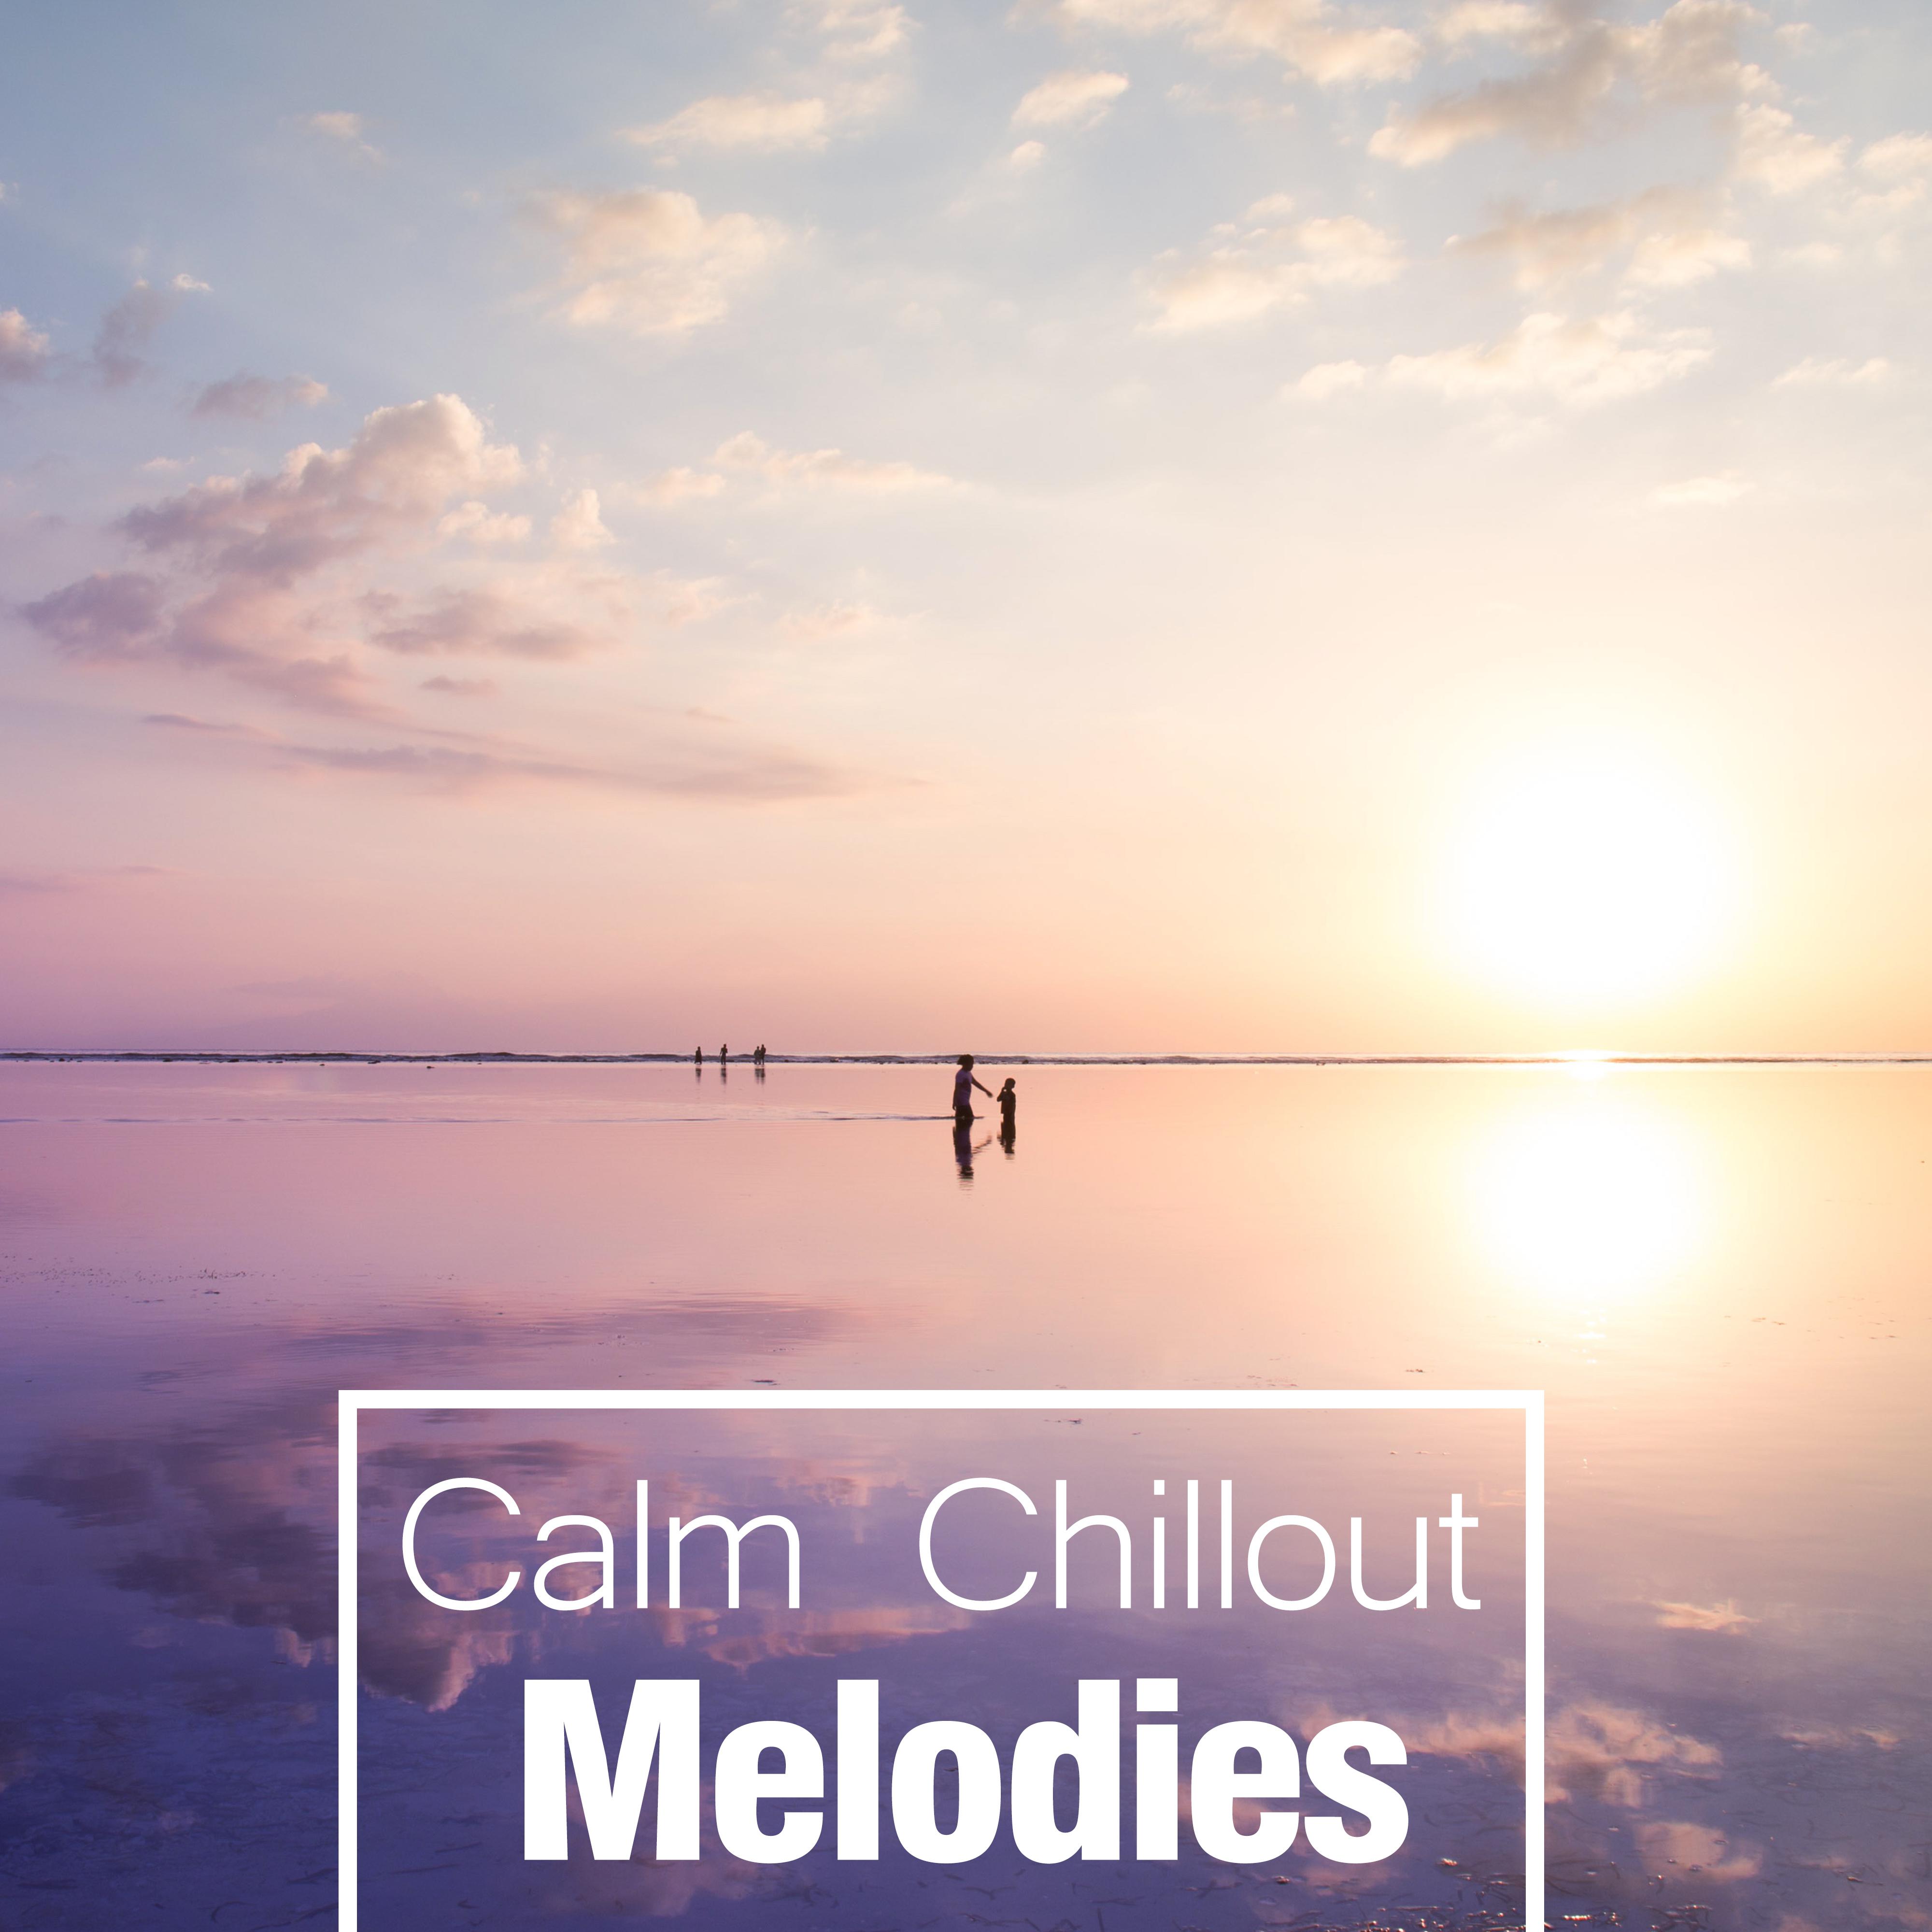 Calm Chillout Melodies – Stress Free, Beach Relaxation Sounds, Music to Rest, Chill Out Beats